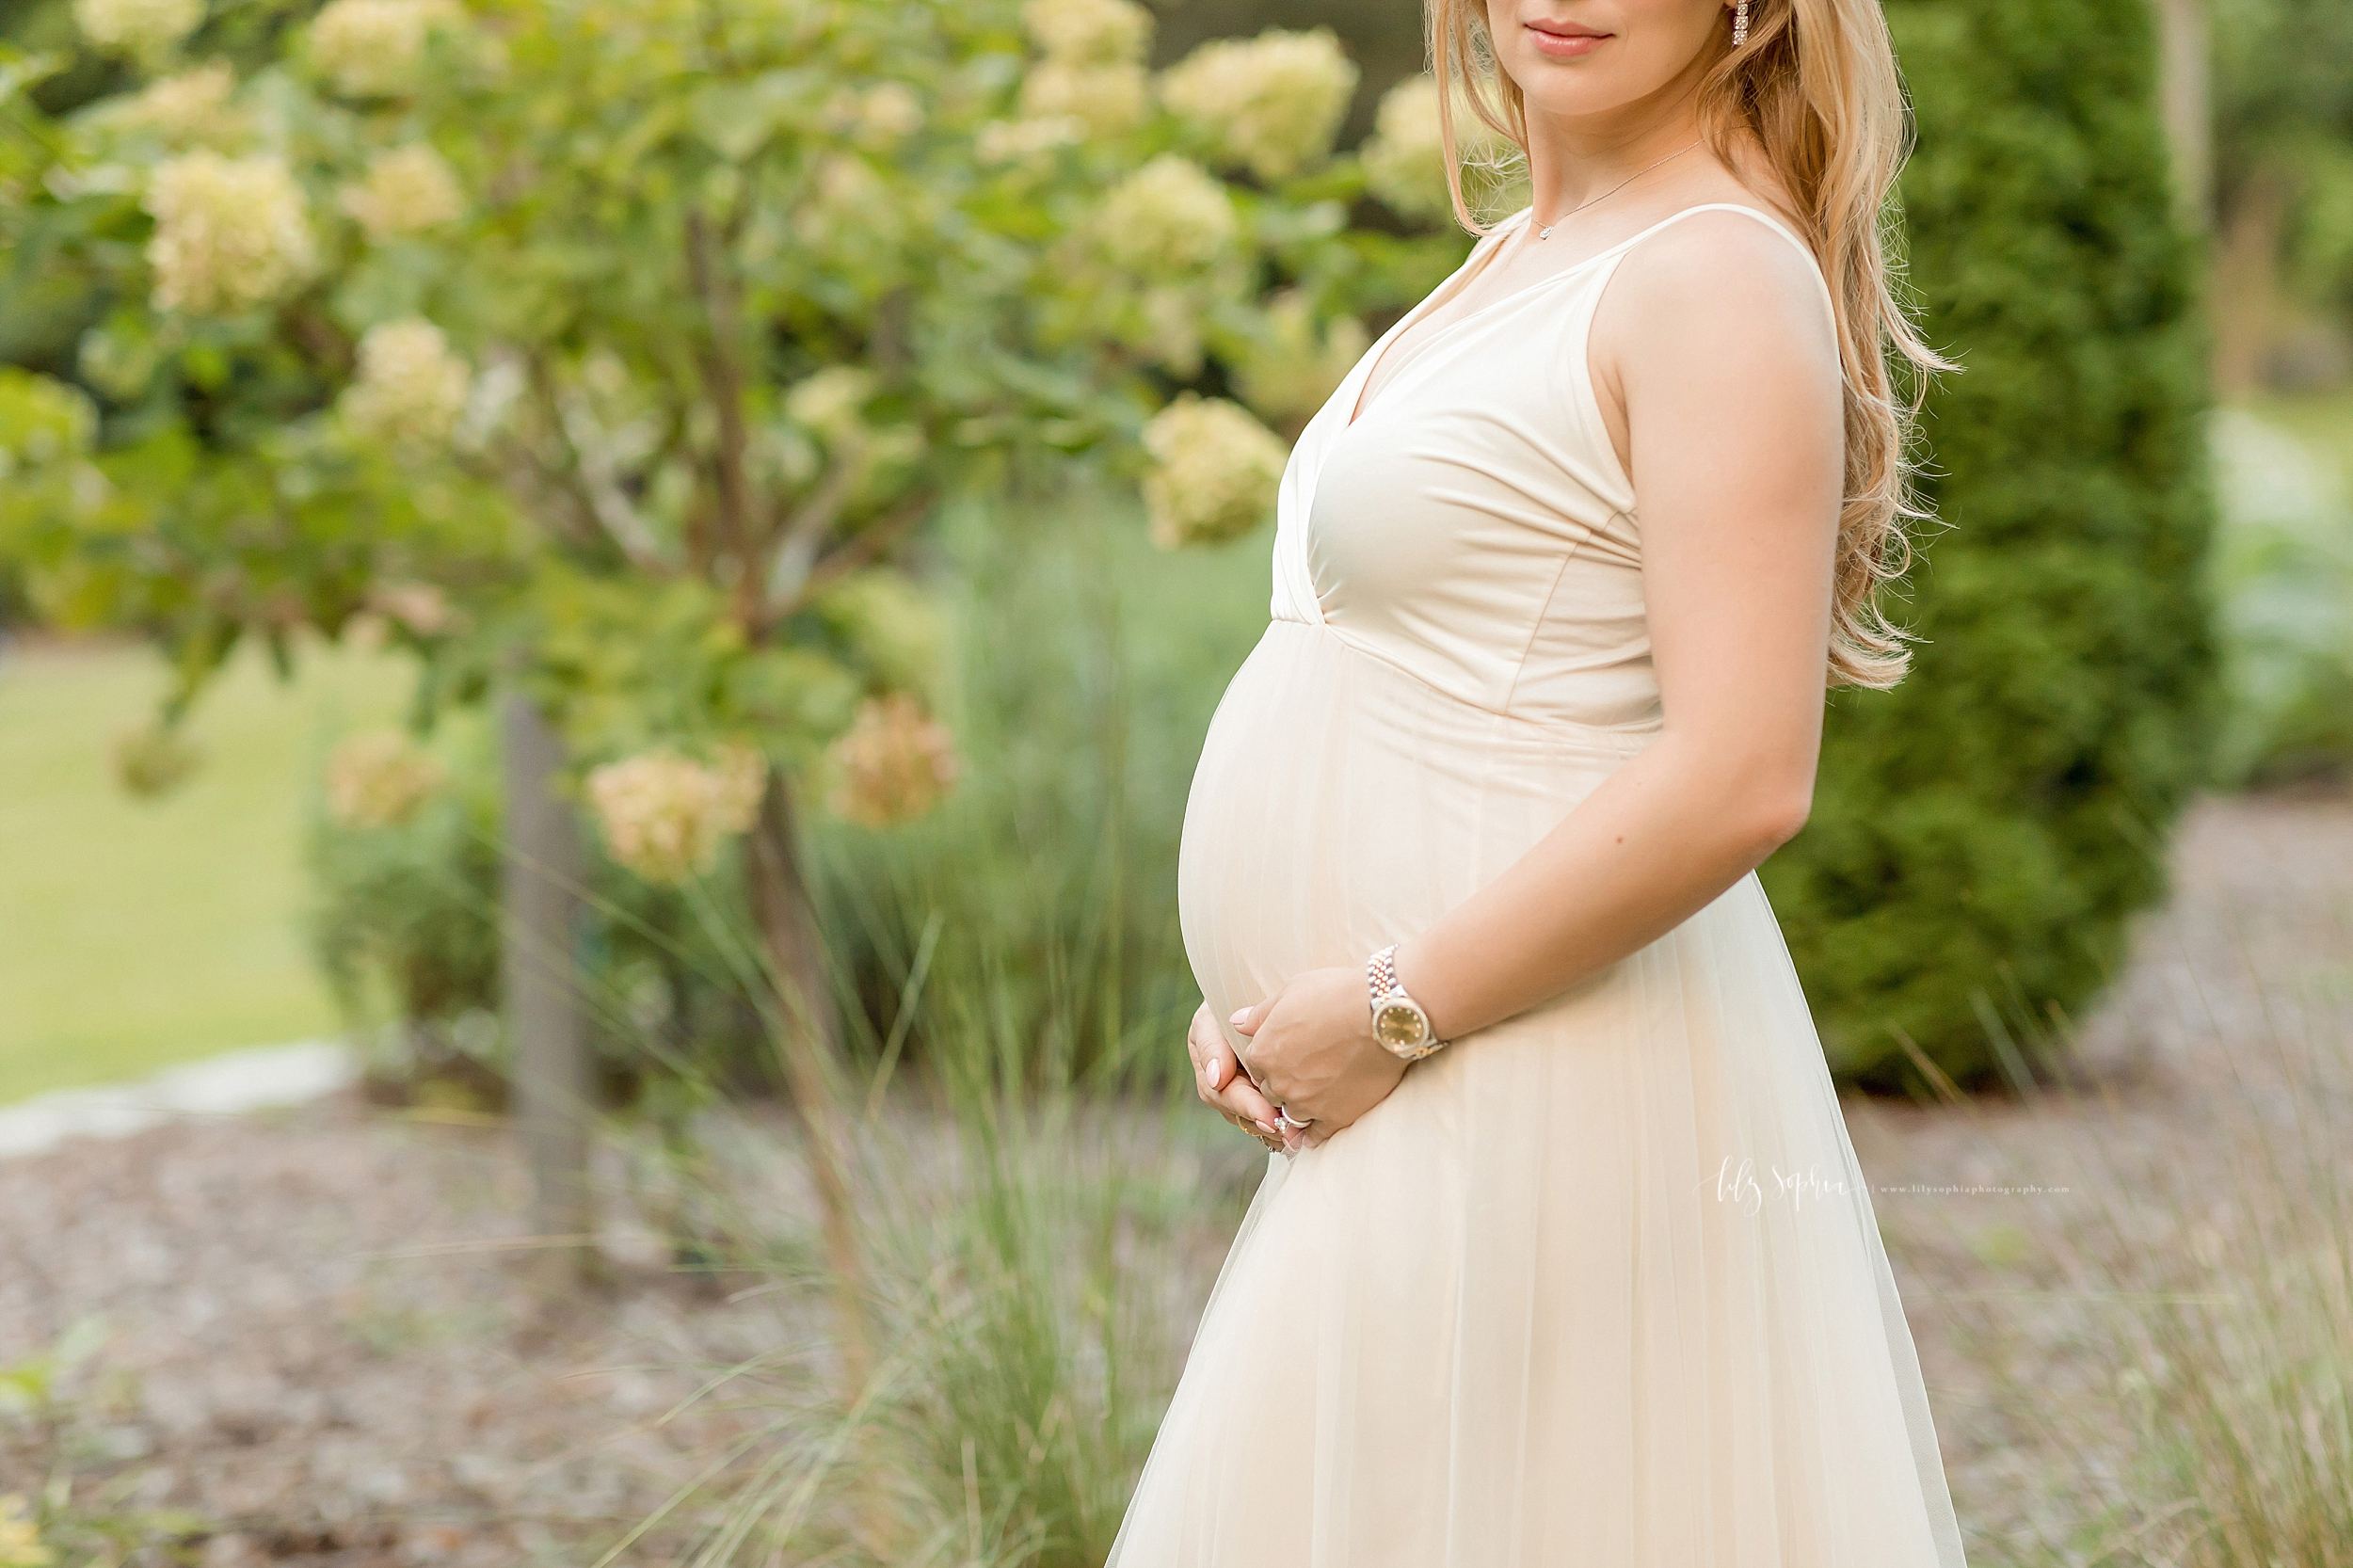 atlanta-buckhead-brookhaven-inman-decatur-lily-sophia-photography-maternity-pregnancy-photographer-portraits-studio-grant-park-intown-couple-russian-expecting-baby-boy-outdoors-gardens-sunset-fall_0670.jpg